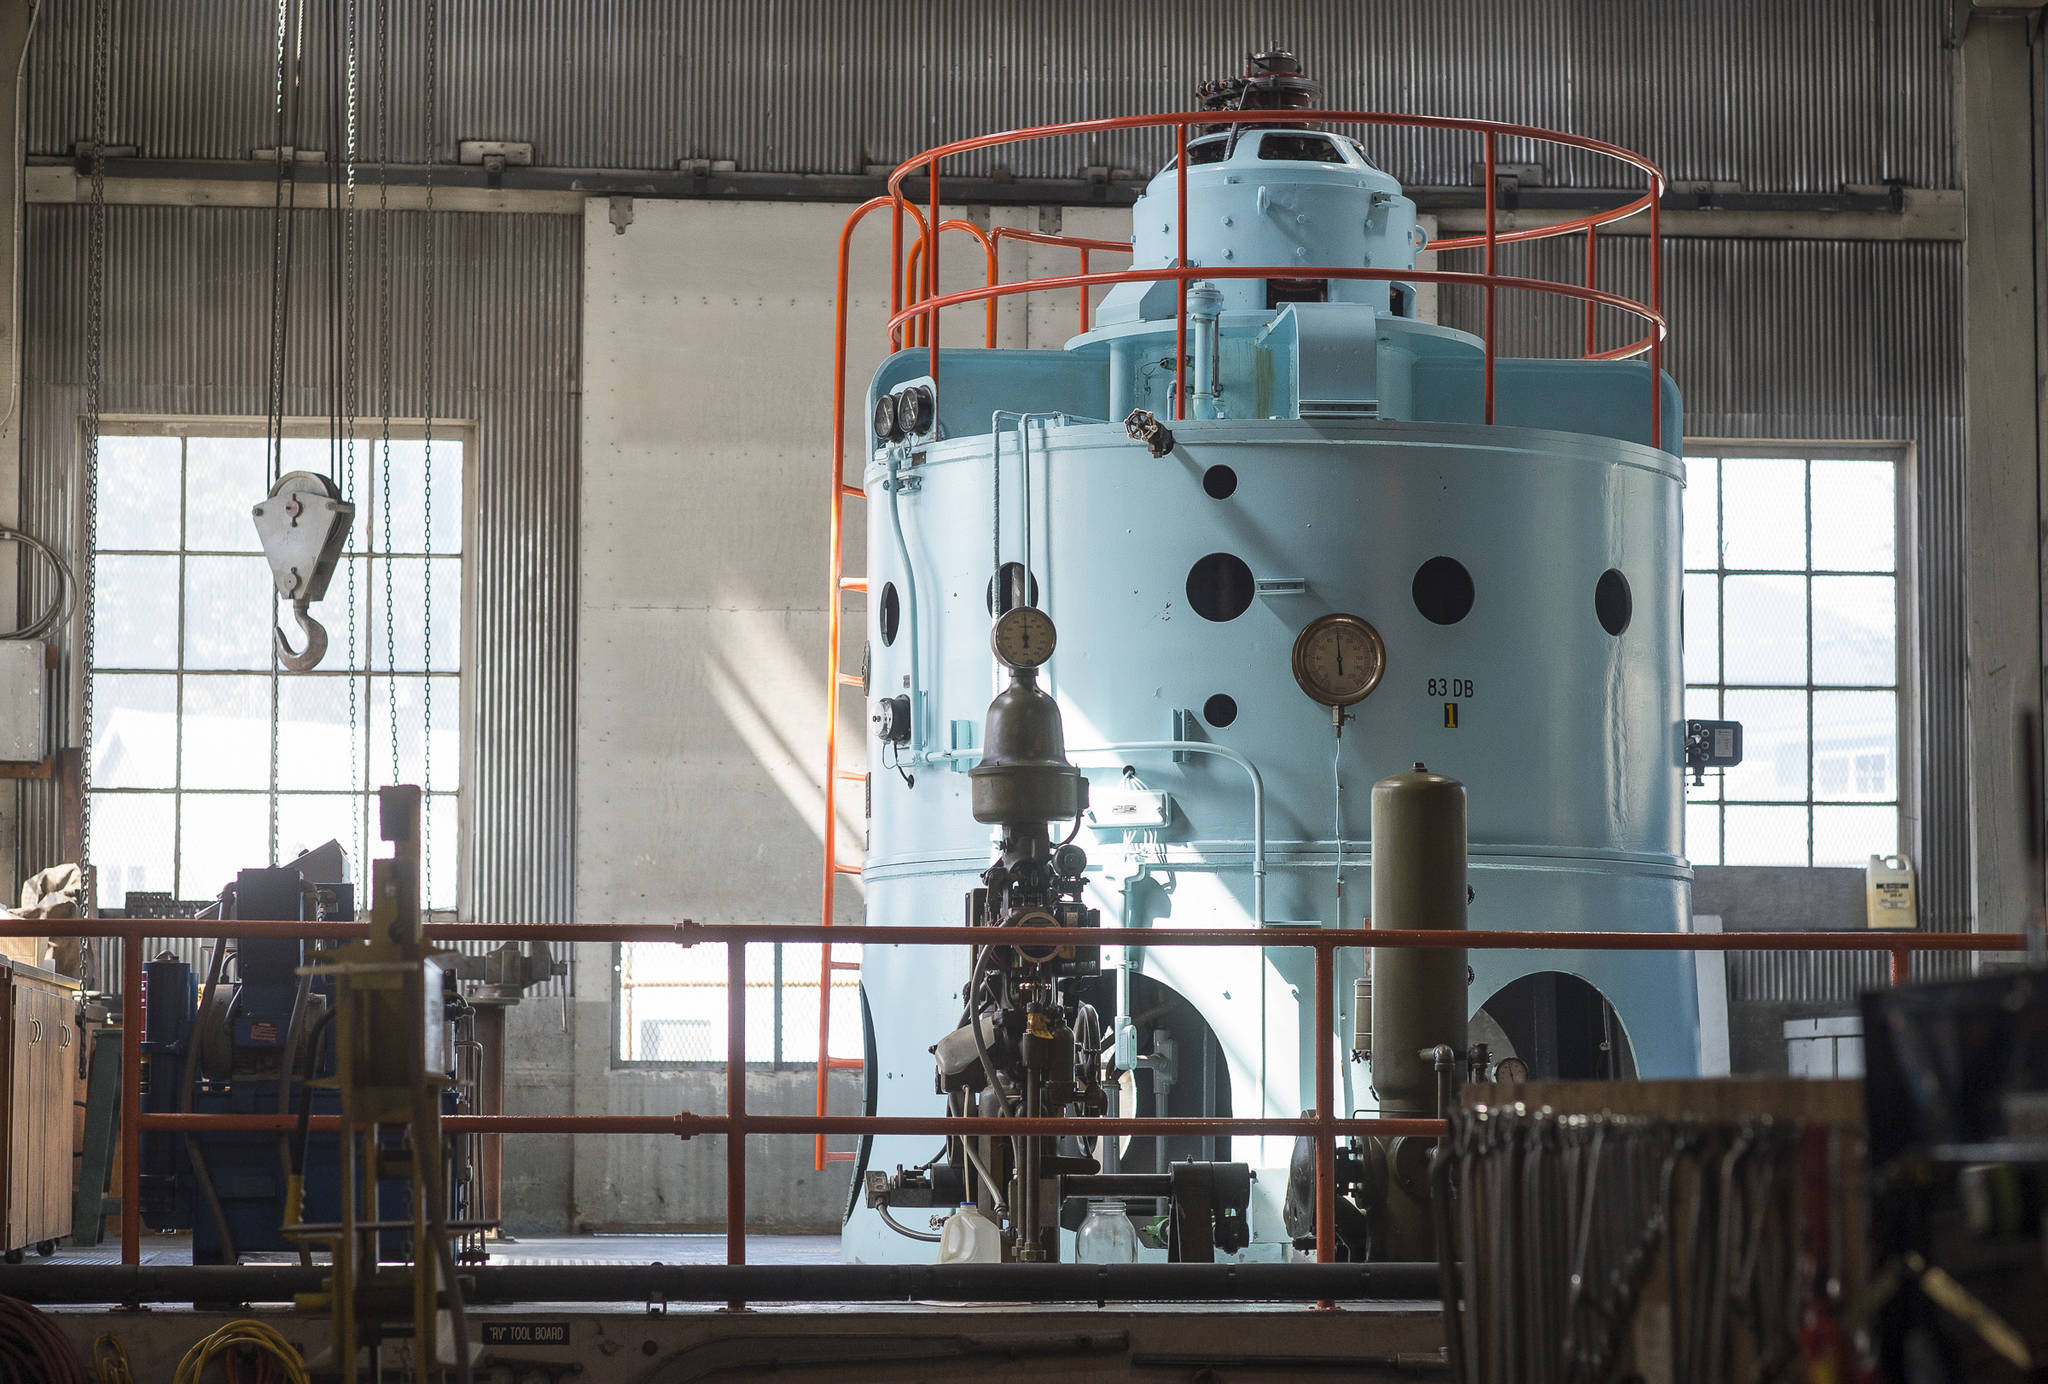 A hydro generator from 1950’s is still in use at the Gold Creek Power Plant in this file photo from 2018. (Michael Penn | Juneau Empire)